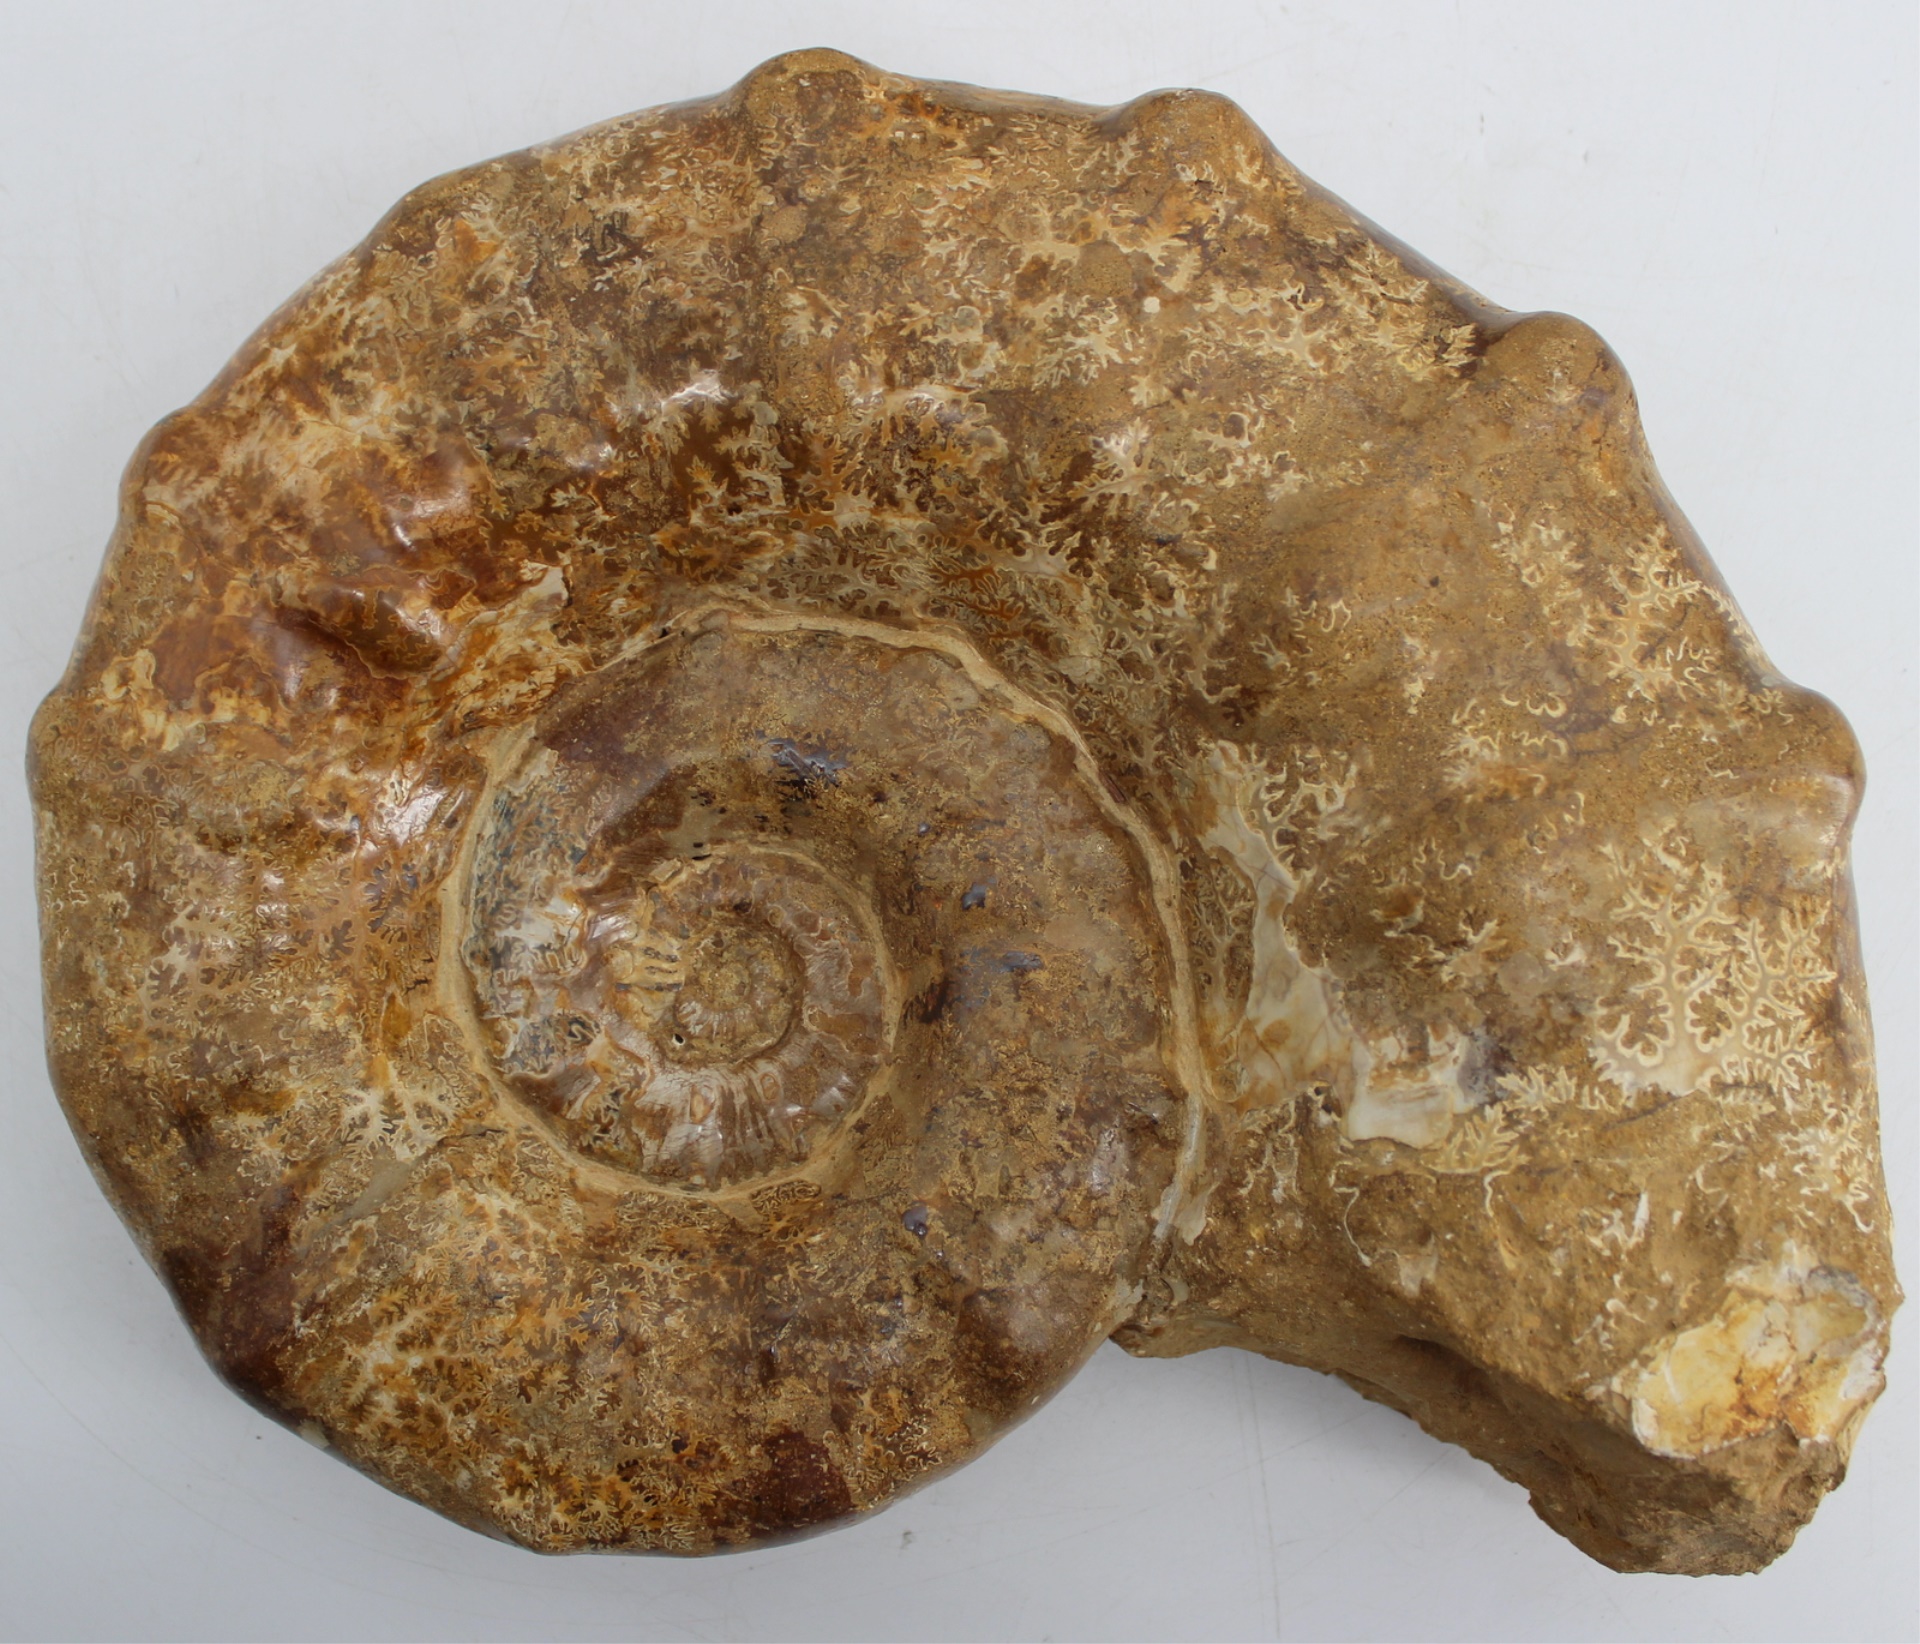 FOSSIL. AMMONITE FOSSIL WITH DEFINED